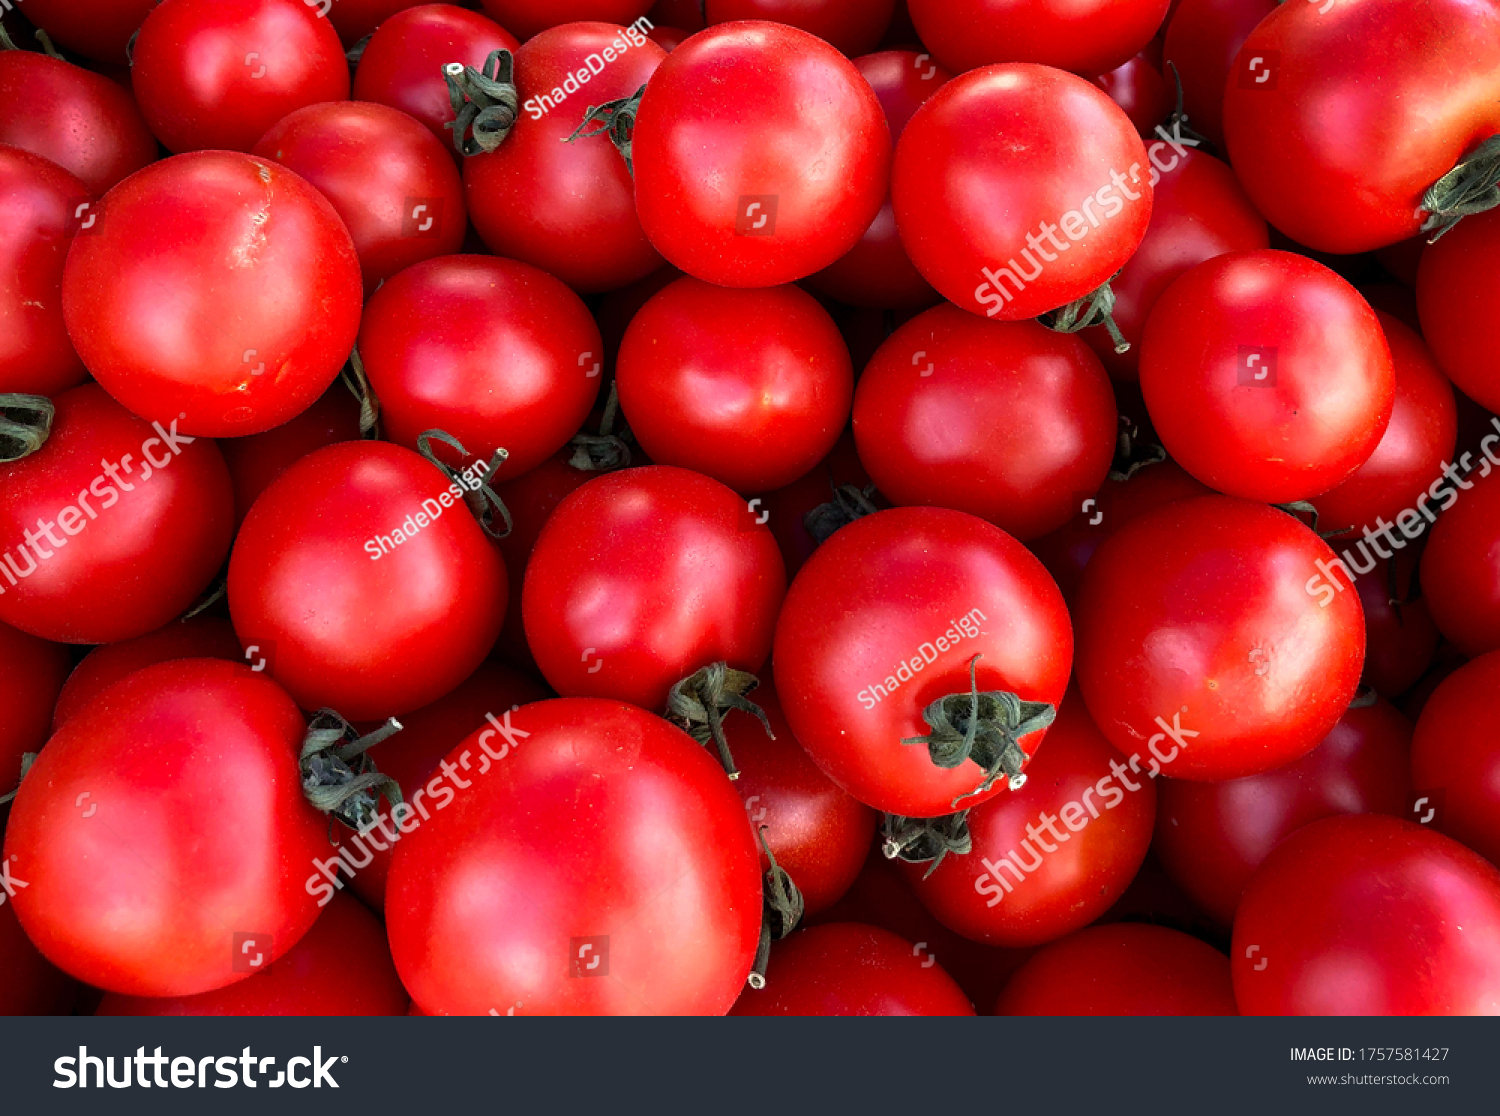 Macro Photo food vegetable tomato cherry. Texture background cherry tomatoes. Stock photo Cherry tomatoes are small juicy and red. #1757581427